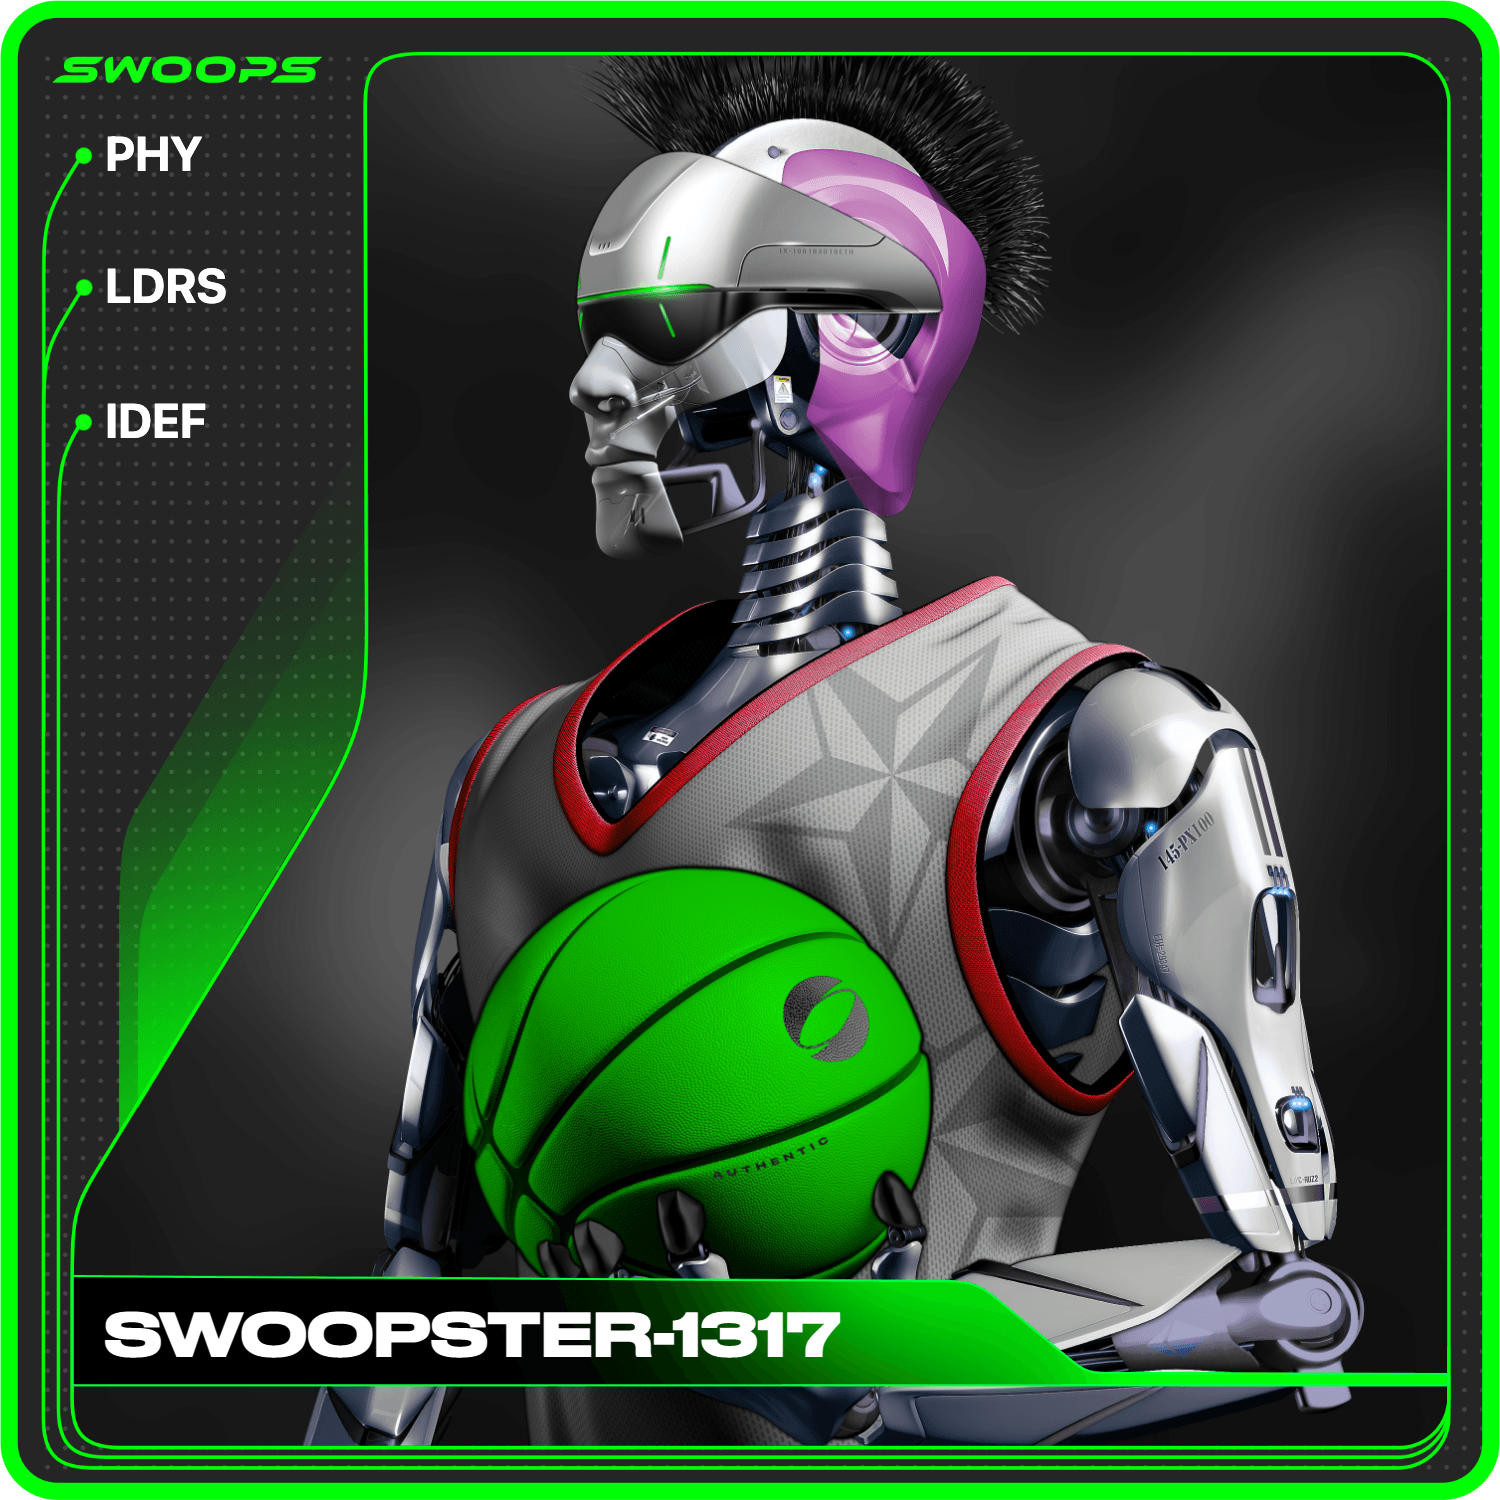 SWOOPSTER-1317